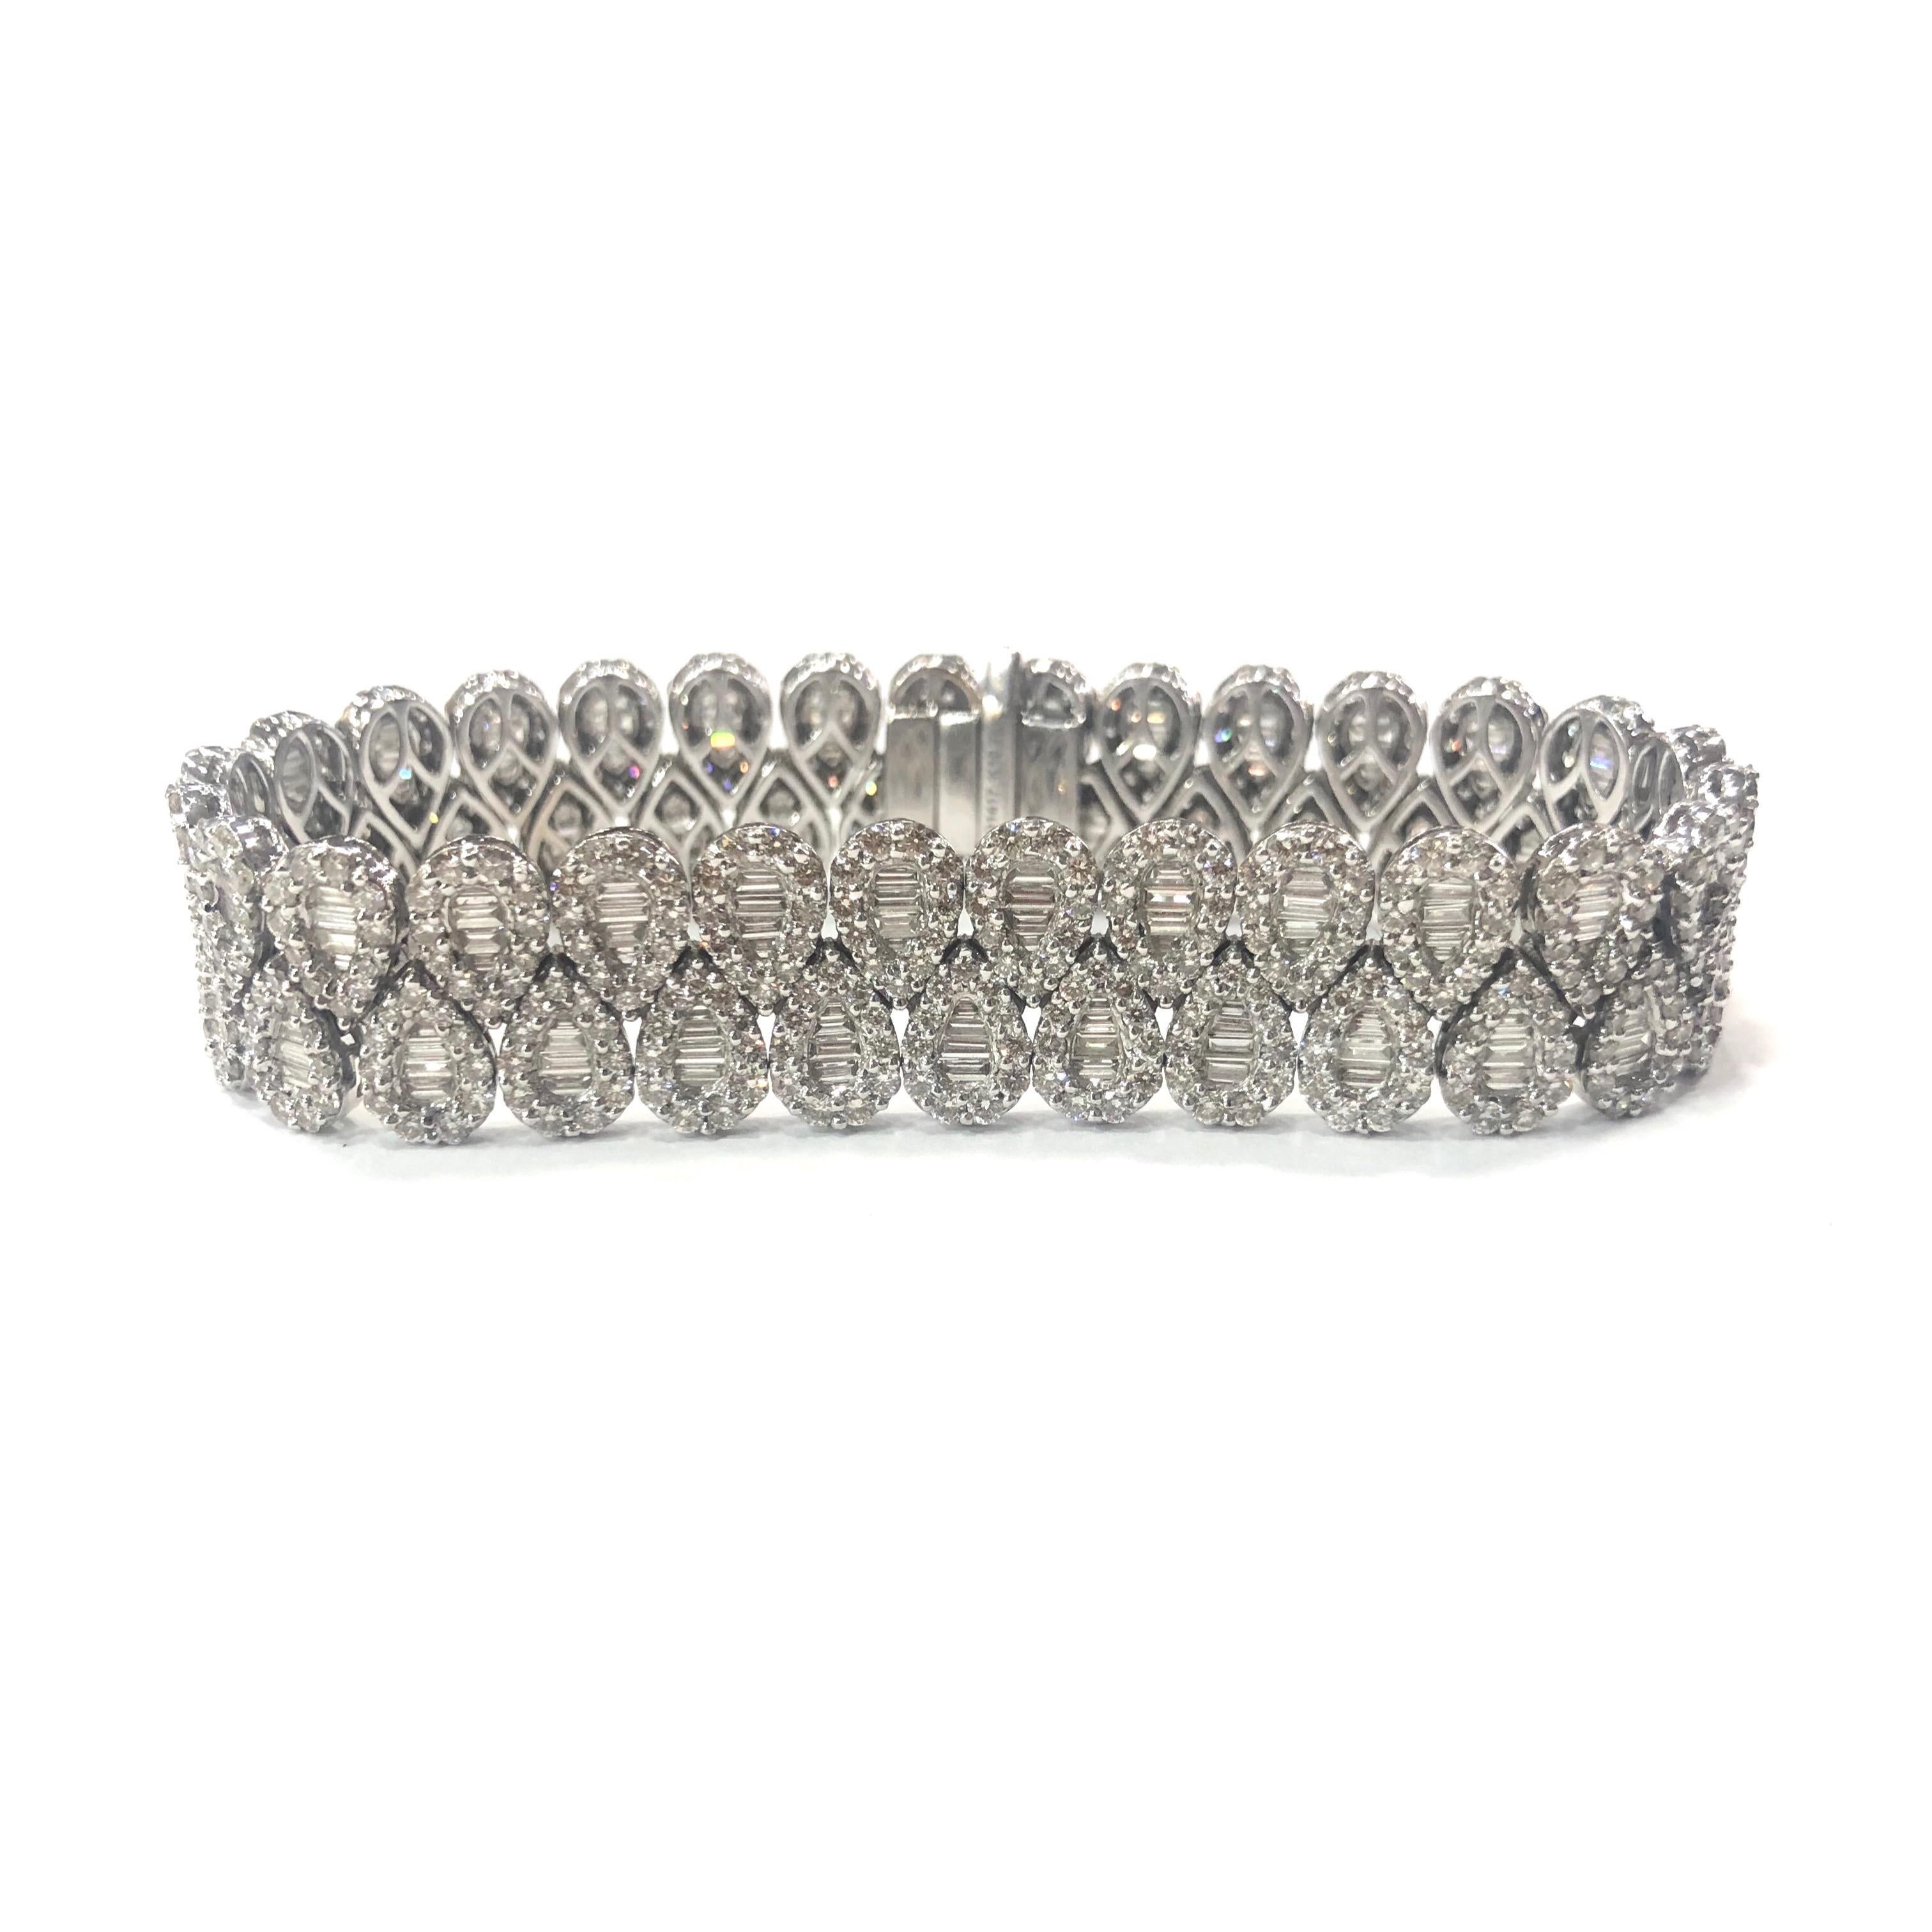 18ct White Gold Baguette and Round Brilliant Cut Diamond Bracelet. Each link is individually set in the design of a pearshape diamond with approximately four baguette cut diamonds in the centre surrounded by eleven round brilliant cut diamonds. With